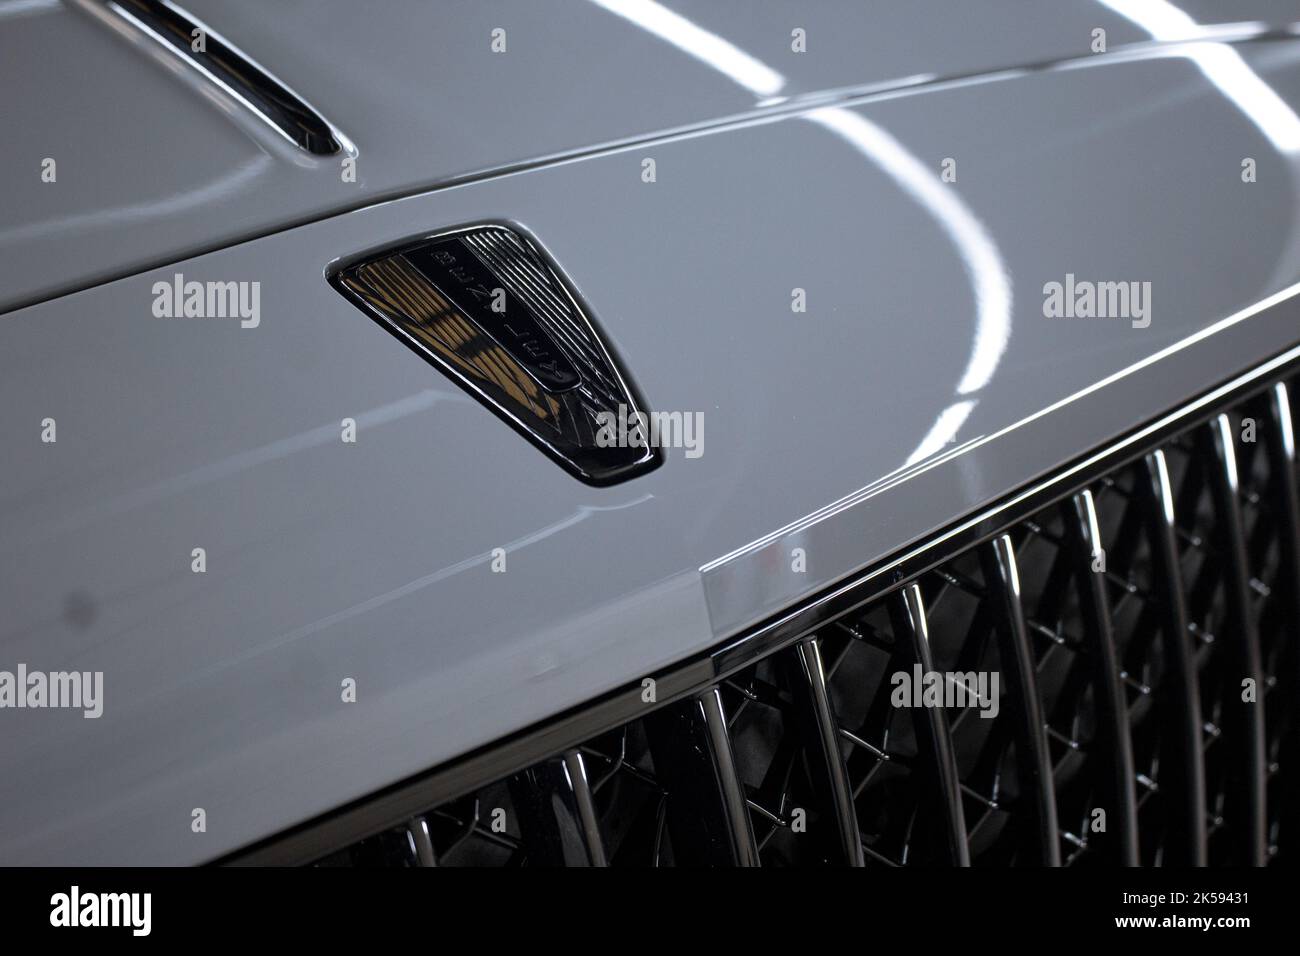 The Bentley Gloss Black Bonnet Badge On The Front Of A 2022 Bentley Flying Spur Black Badge With Black Bonnet Grilles Stock Photo